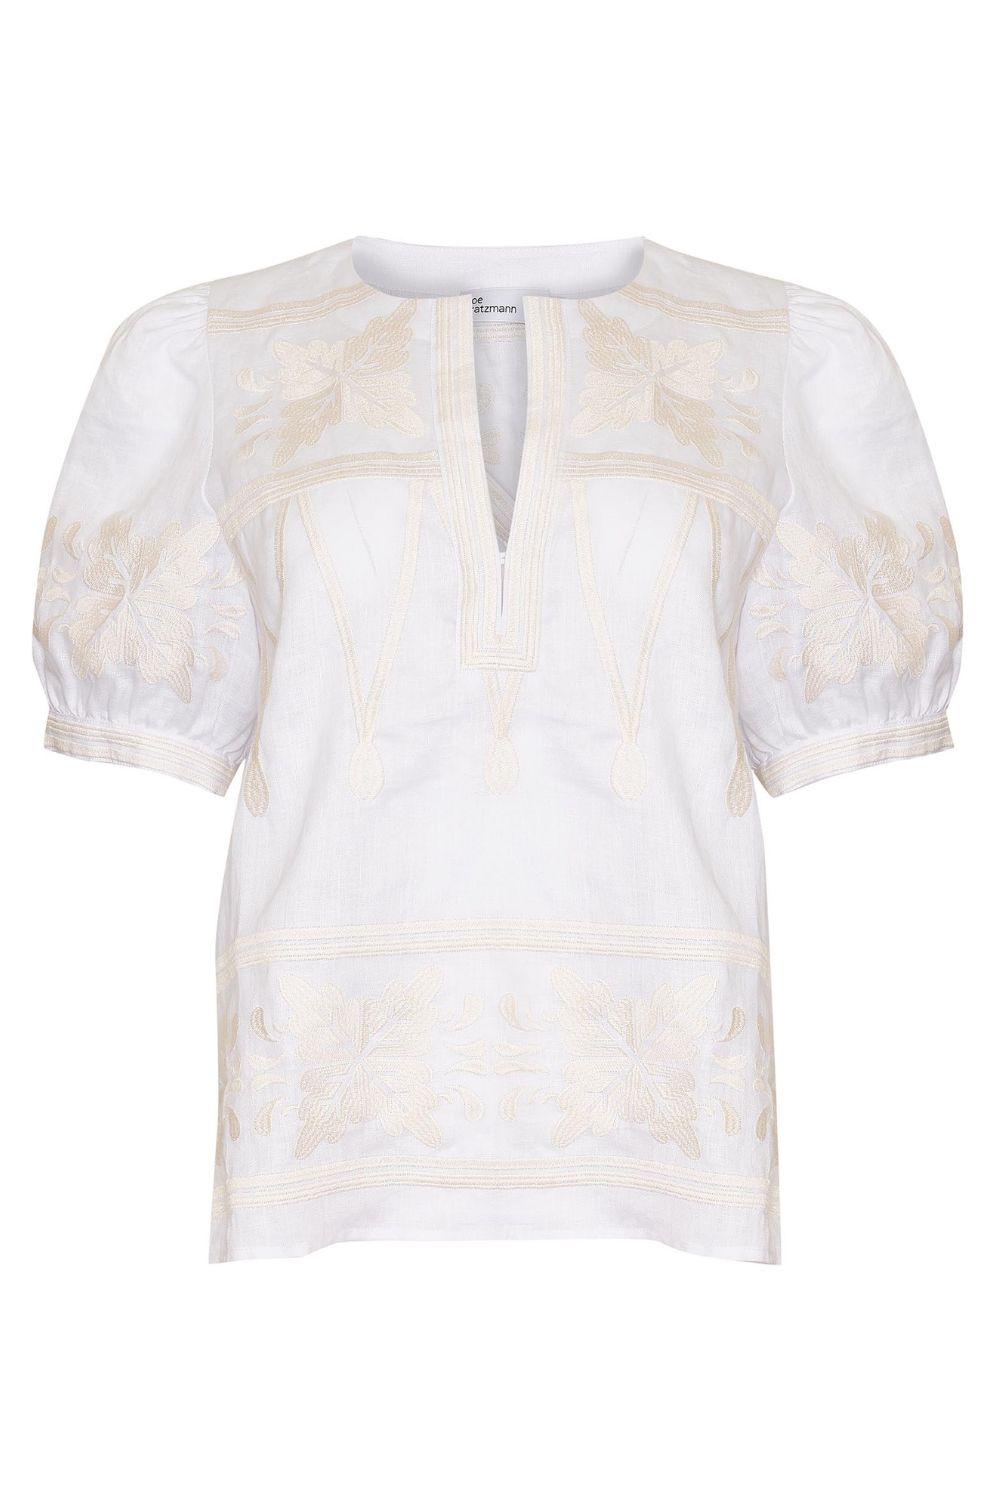 white and cream, top, small side splits, mid length sleeve, embroidered,  rounded v neckline, product image